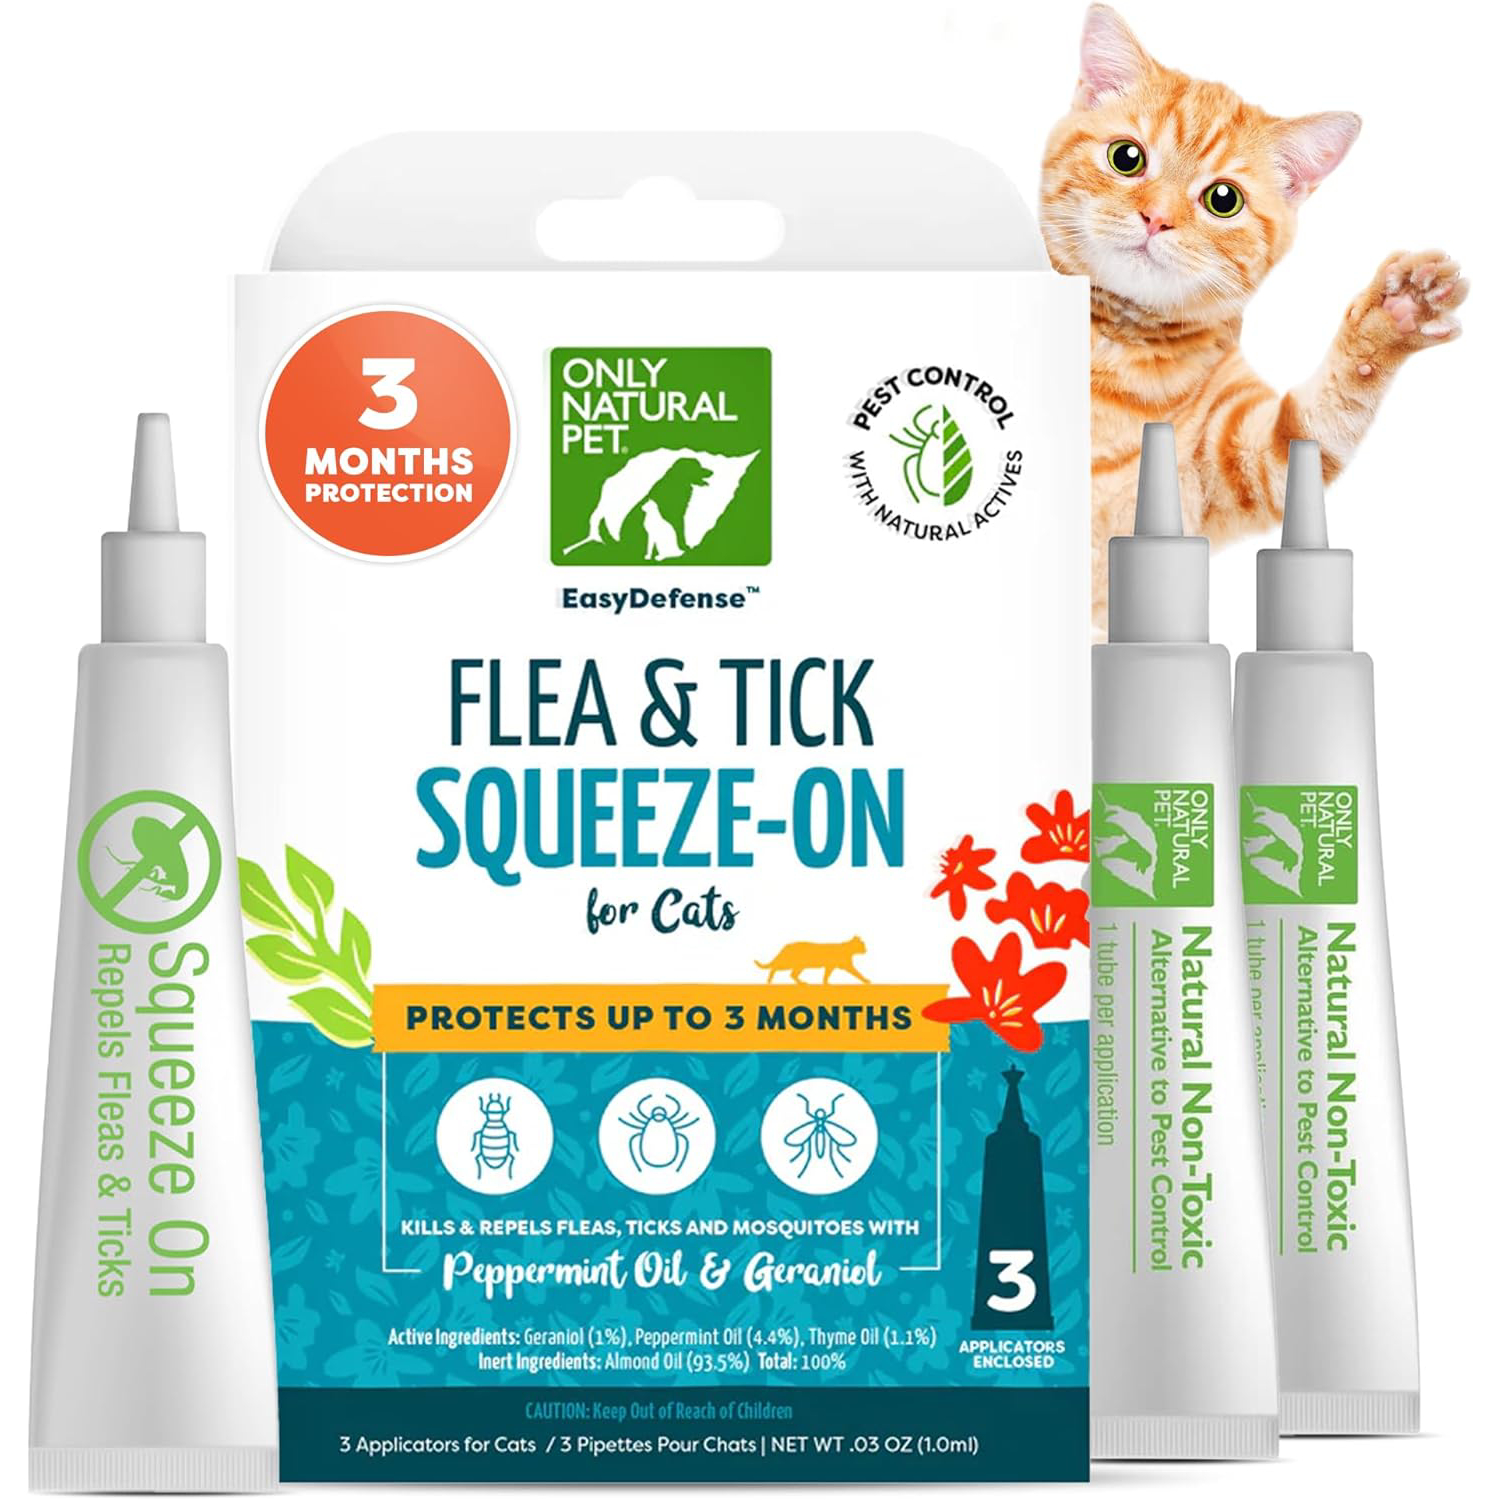 Only Natural Pet Squeeze-On Flea Treatment